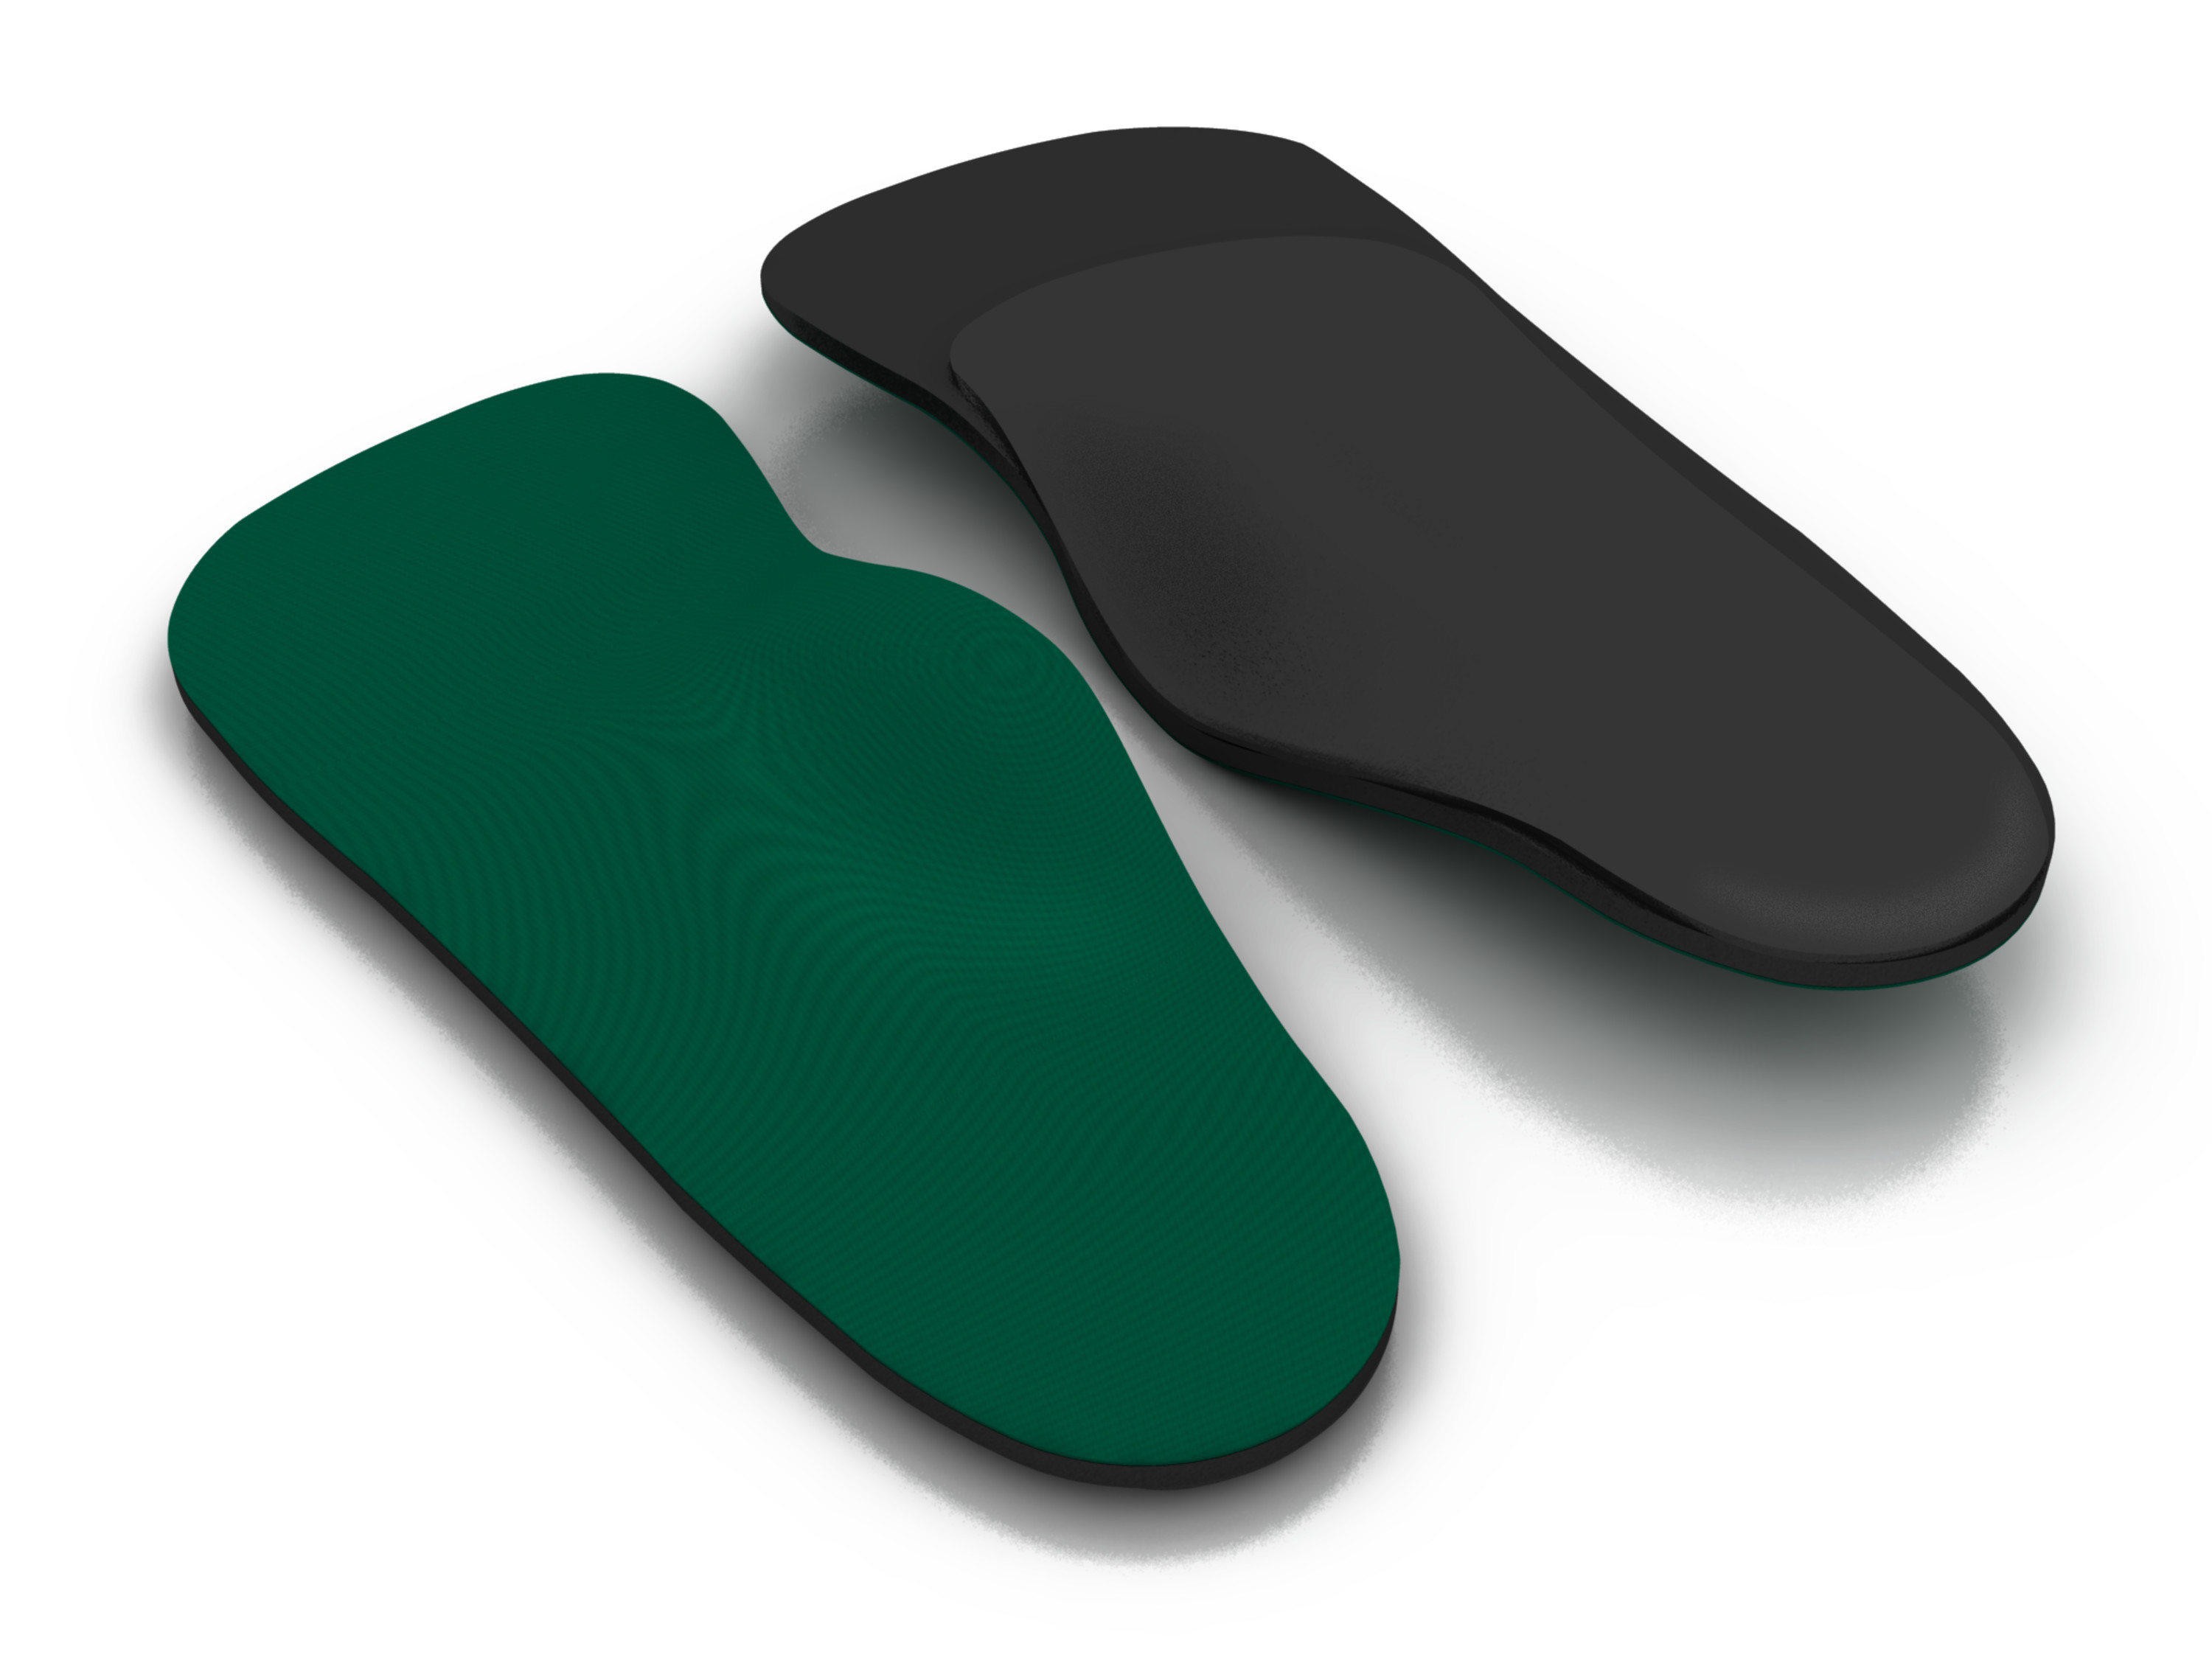 Spenco Rx Arch Cushions 3/4 Length Insole - image 2 of 7